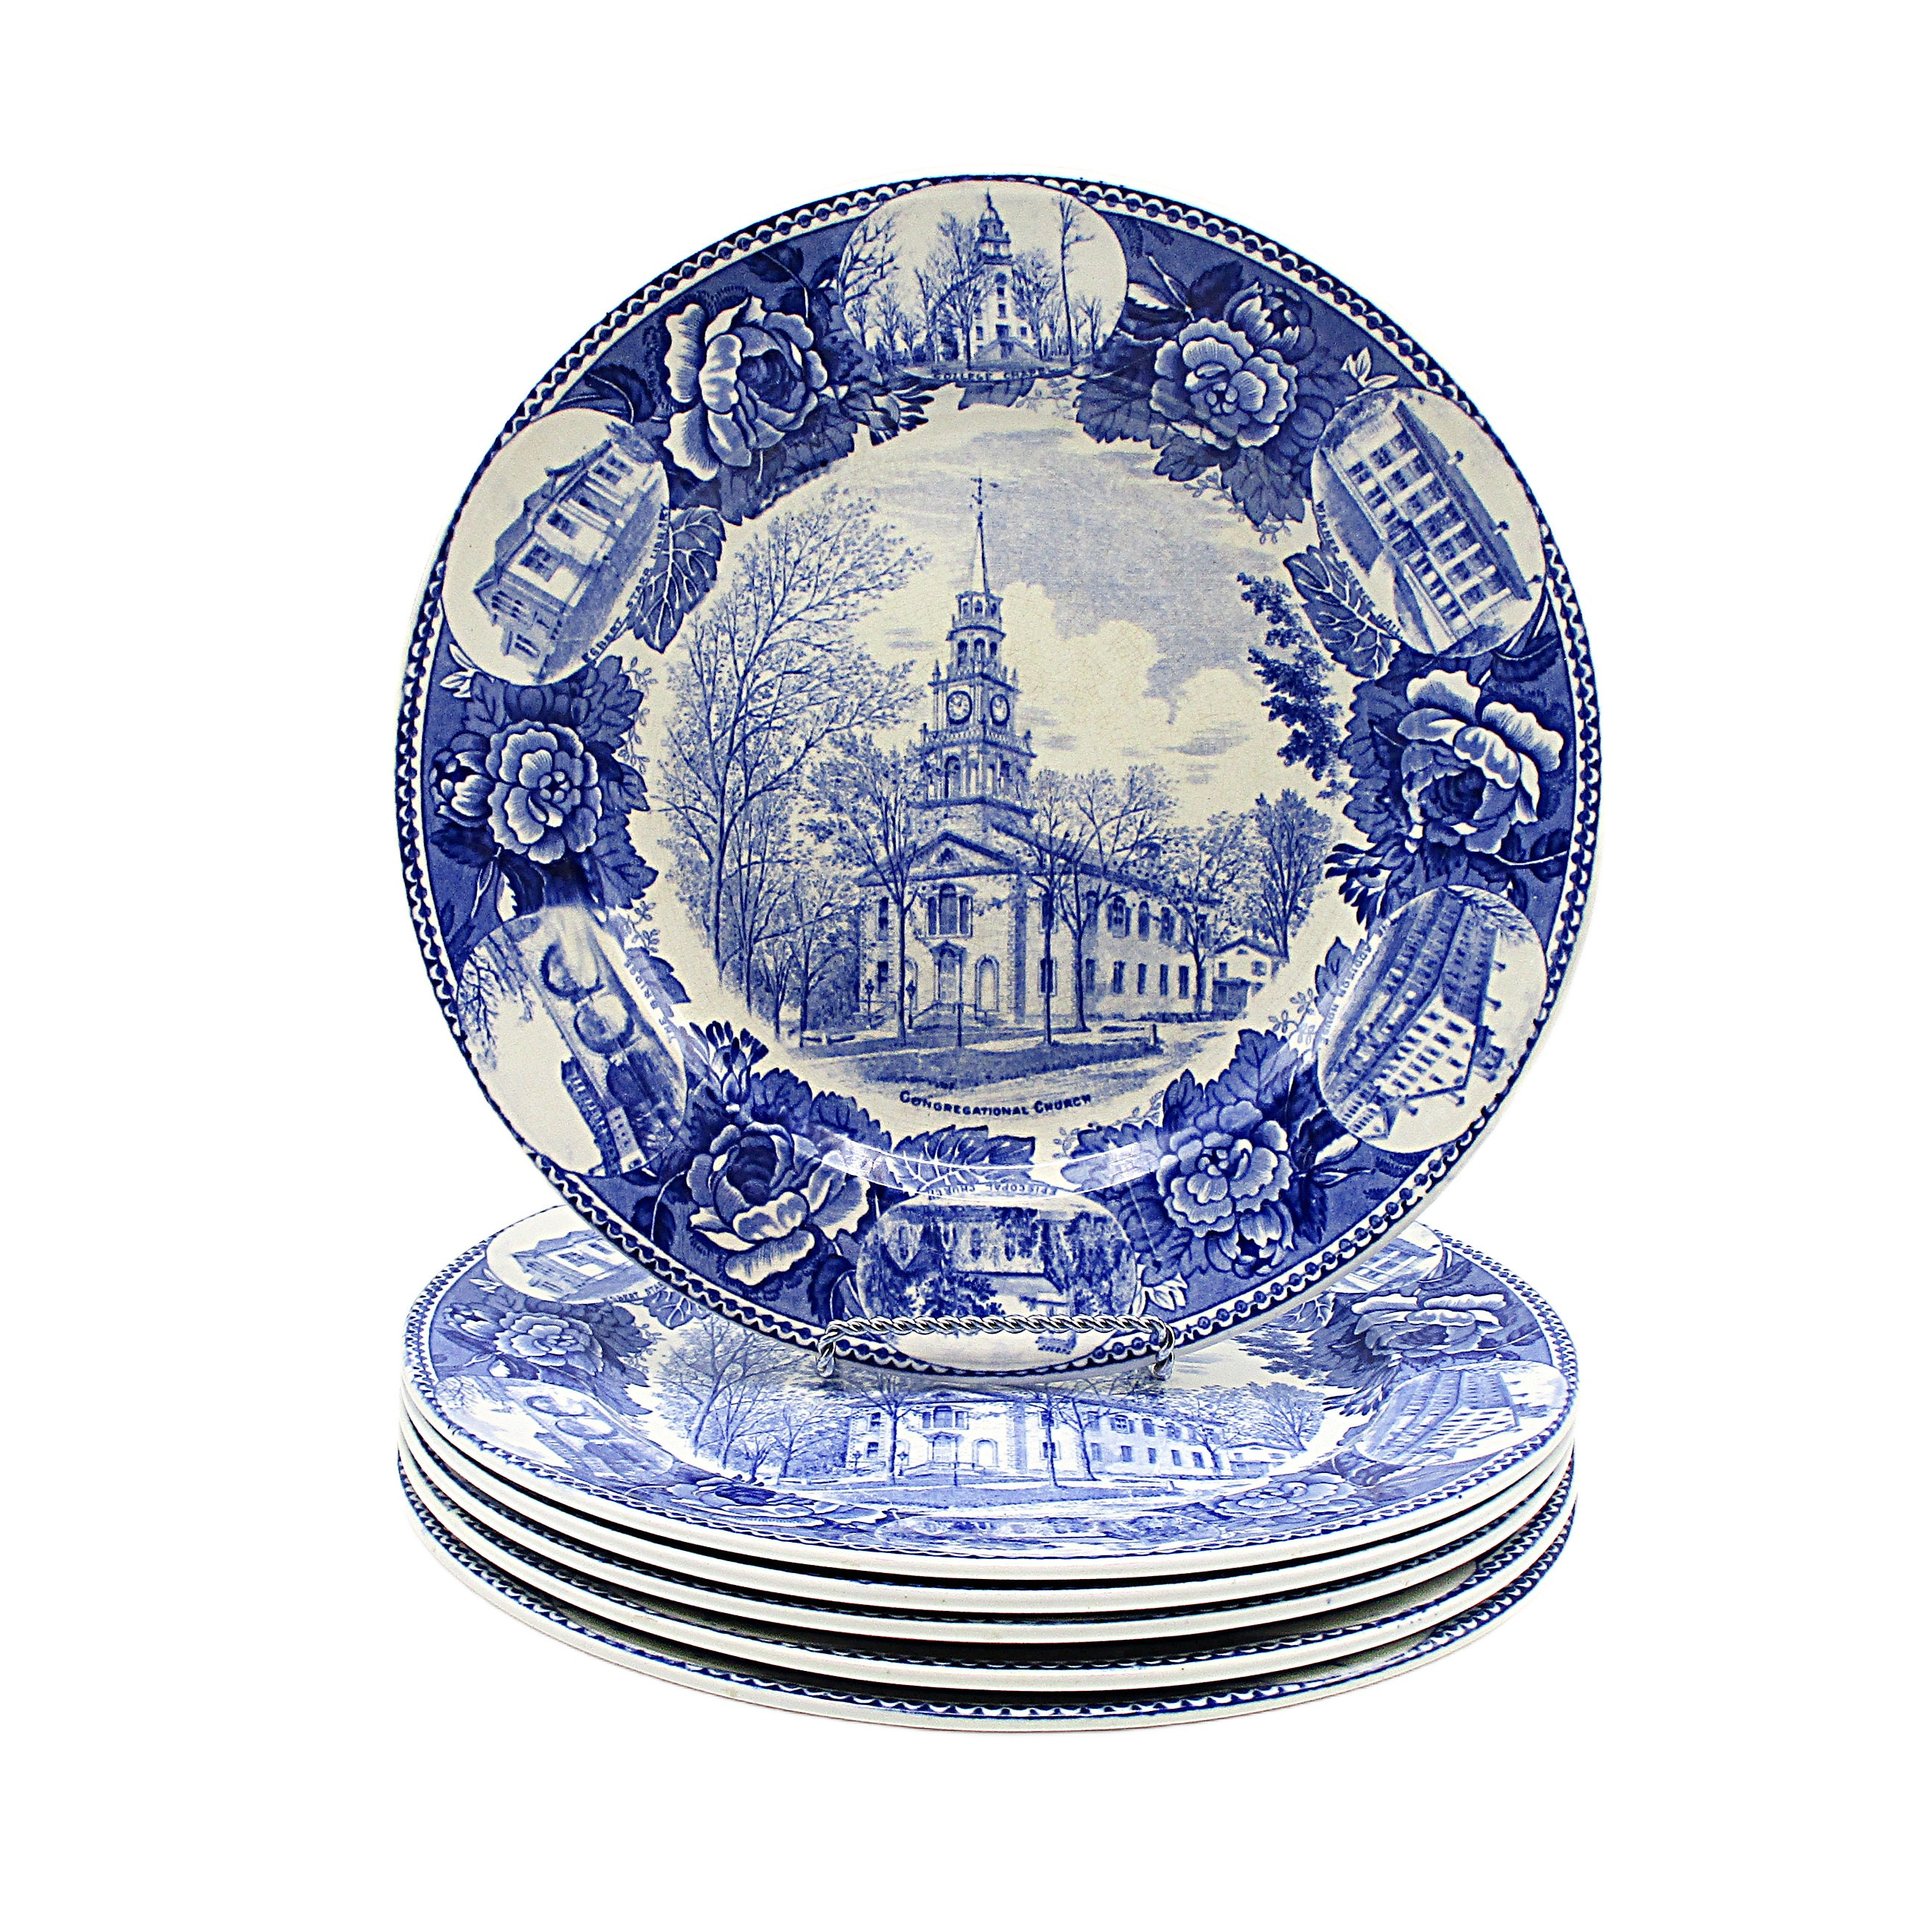 Wedgwood Congregational Church Dinner Plates Set of 6, Blue White Plates, Florals and Historical Buildings